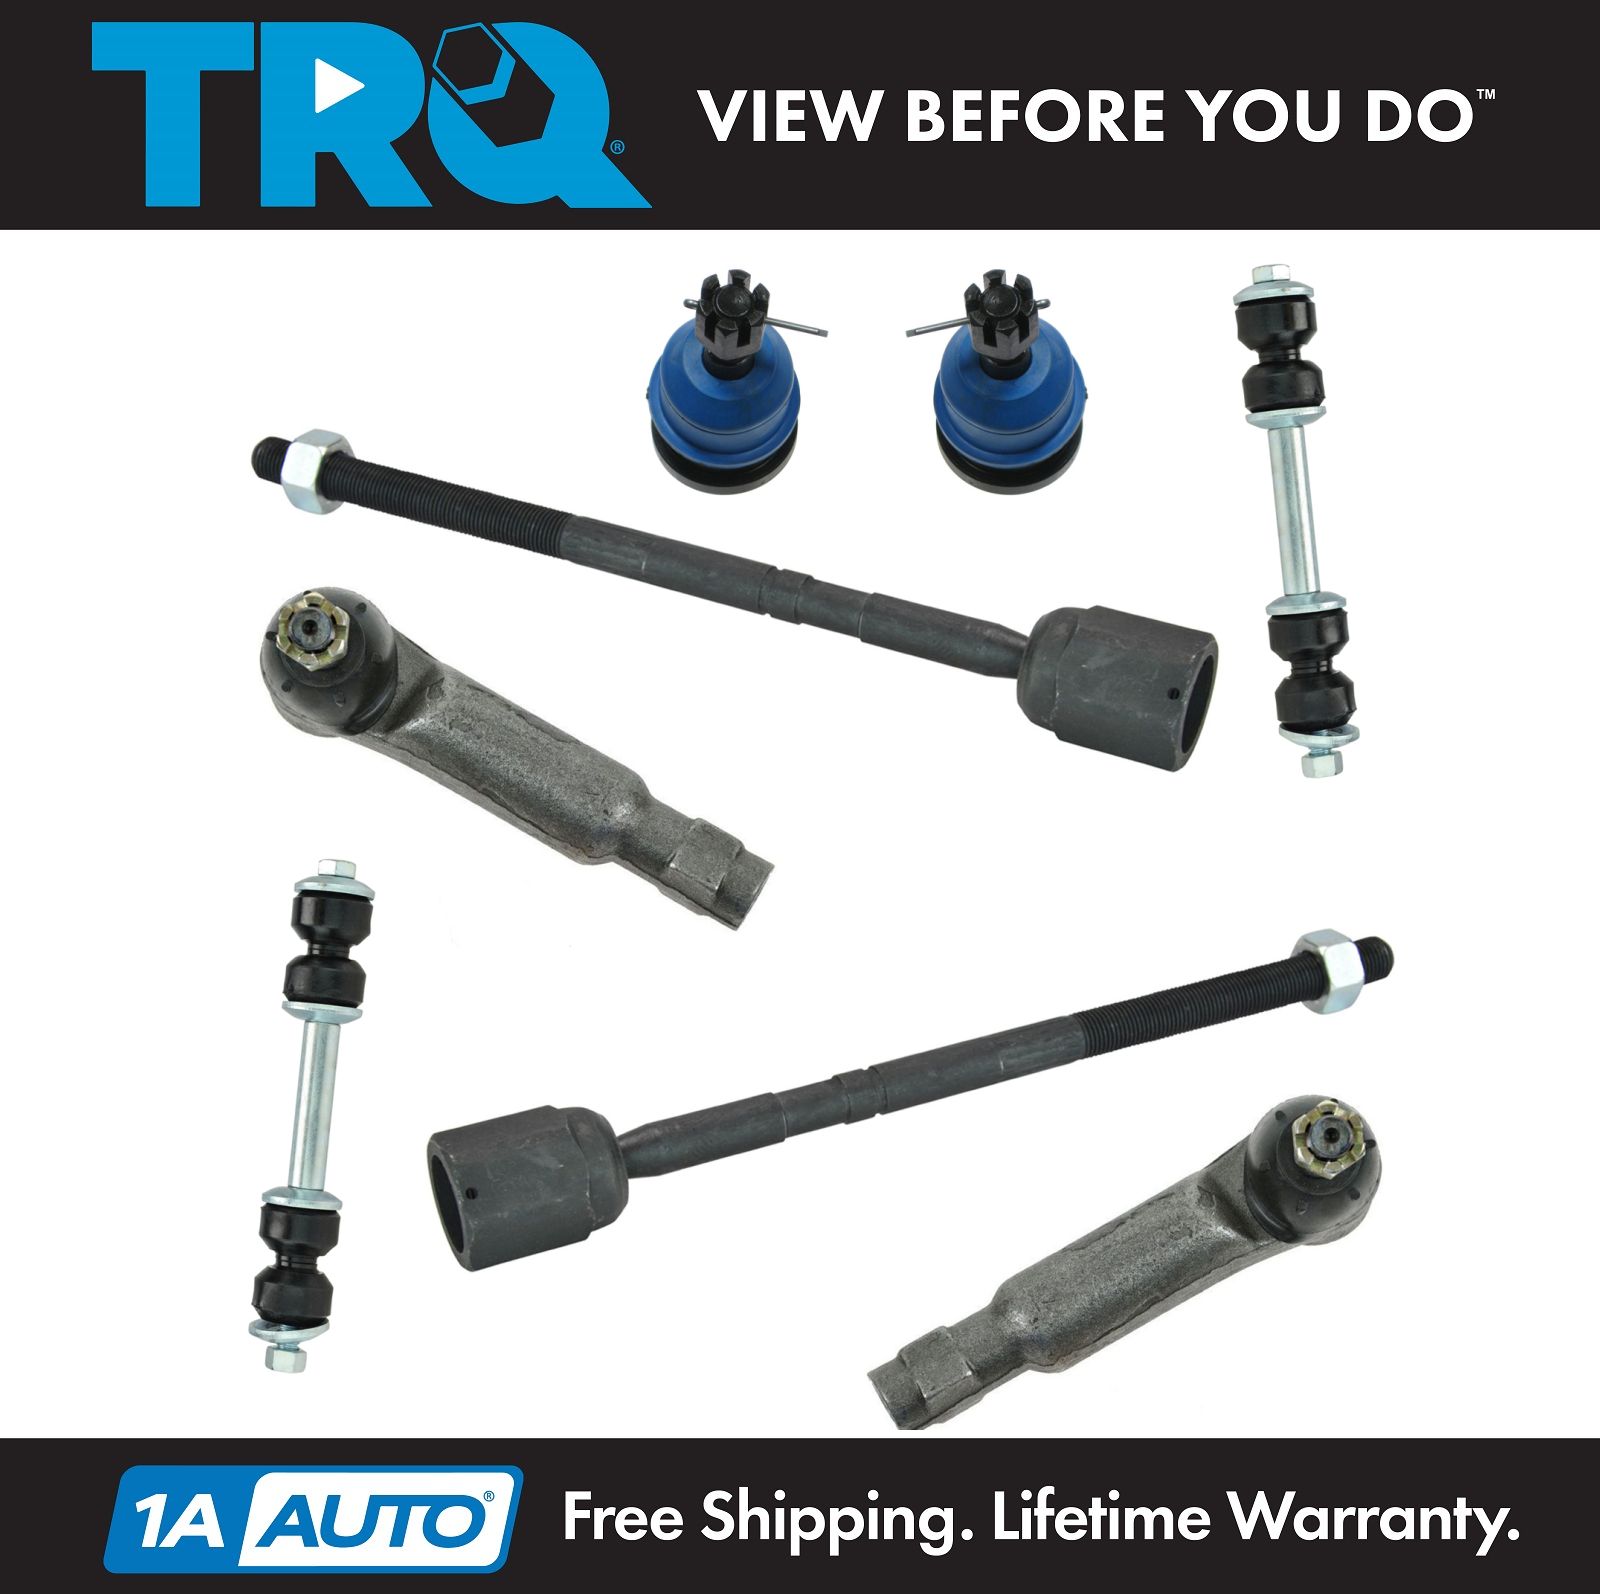 Brand New Set of 2 Front Outer Tie Rod End Links for Ford Mustang Thunderbird